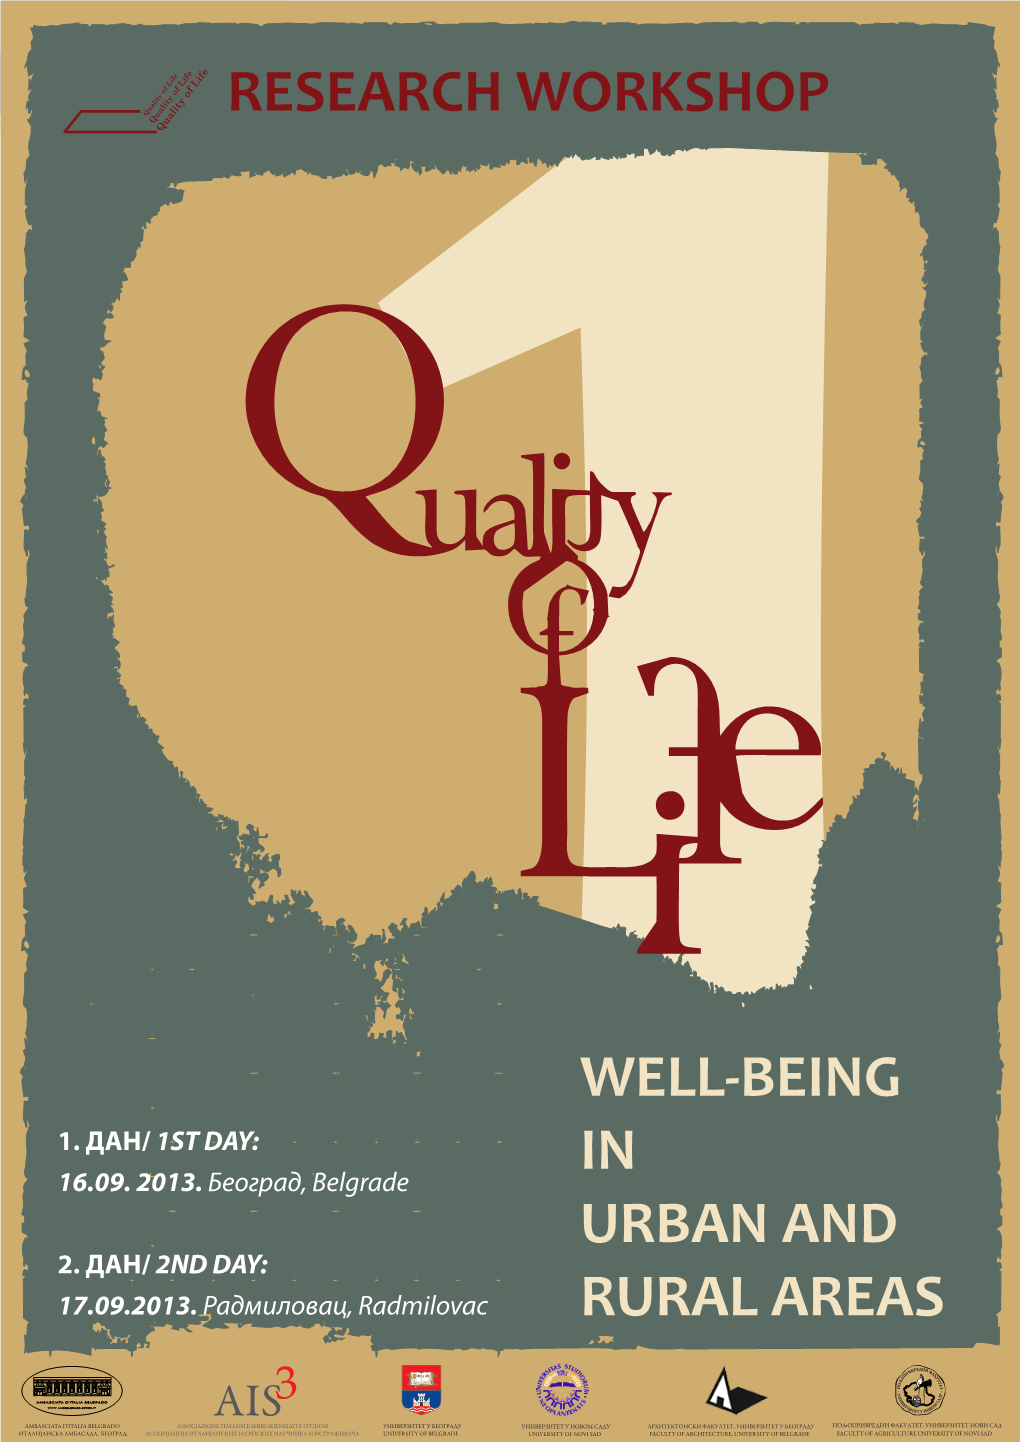 Well-Being in Urban and Rural Areas” Quality of Life Quality of Life Quality of Life Belgrade, September 16Th, 2013 / Radmilovac, September 17Th 2013